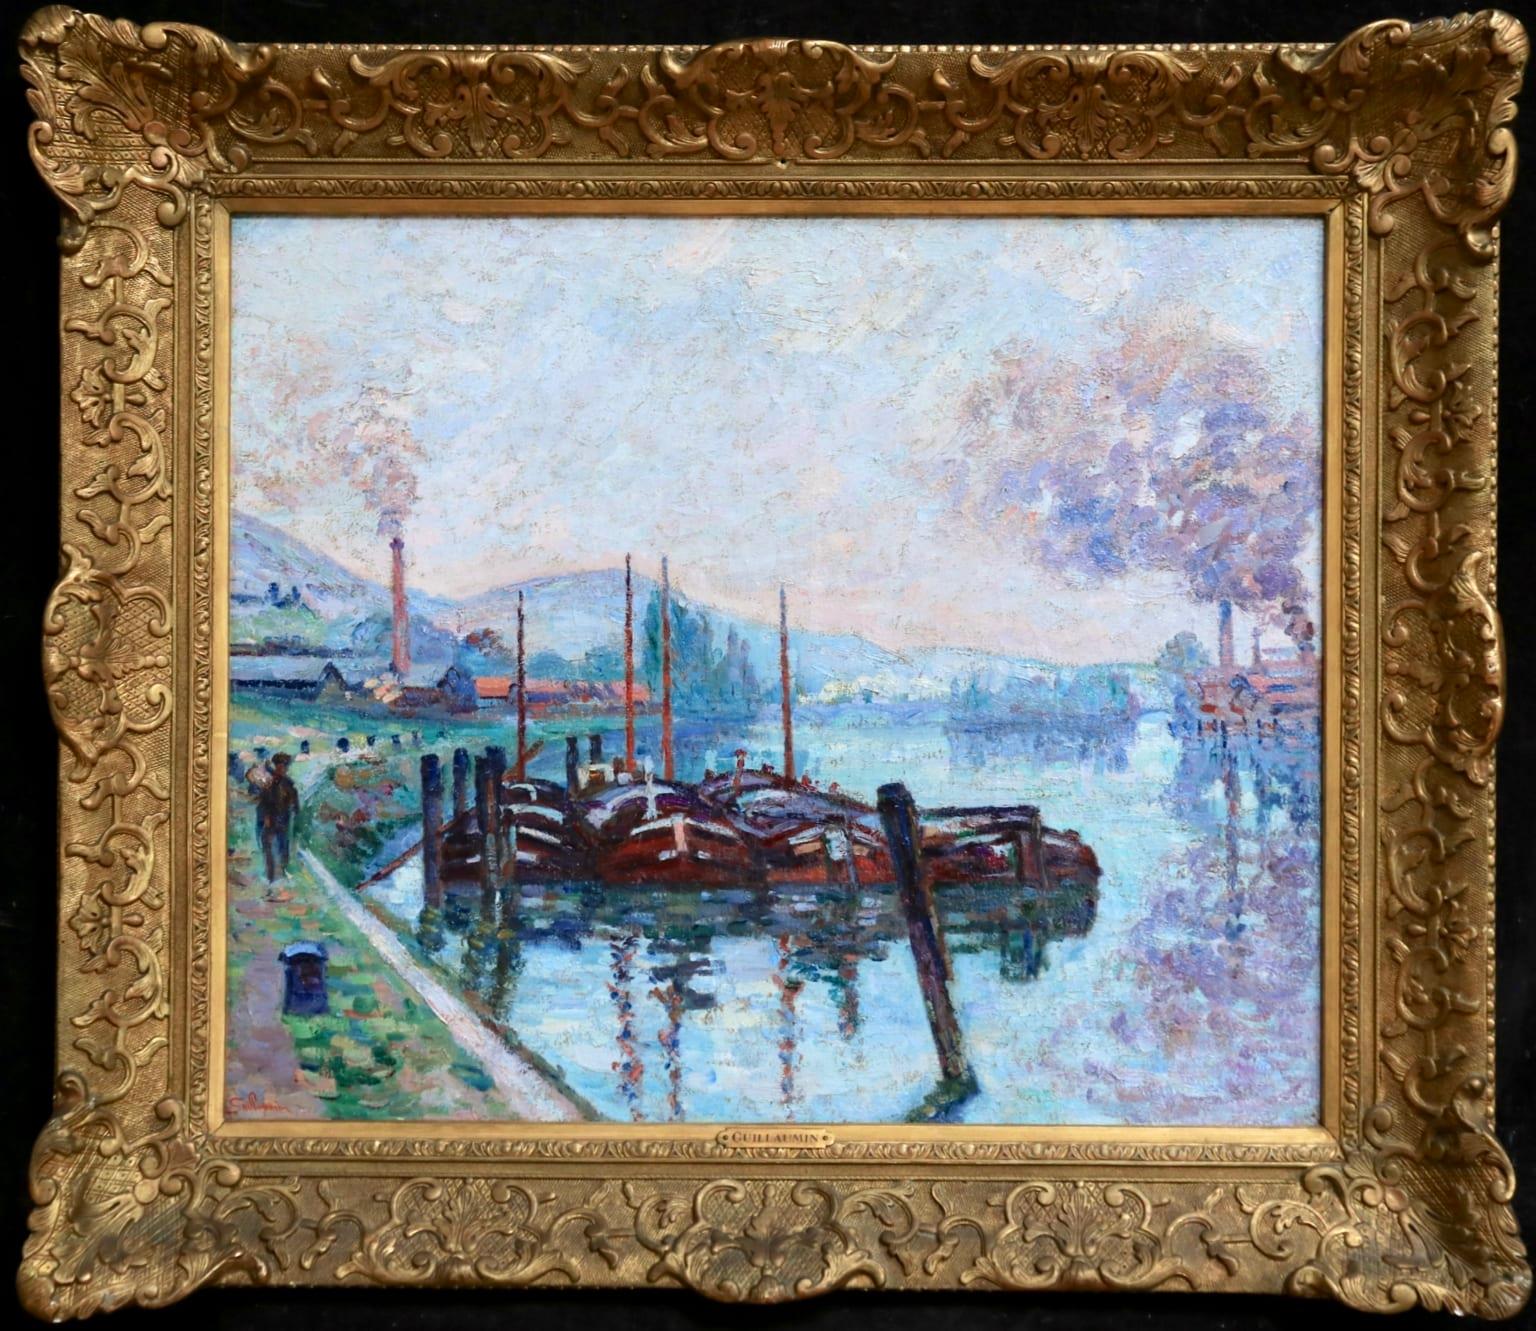 Morning Rouen - Impressionist Oil, Boats on River Landscape by Armand Guillaumin - Painting by Jean Baptiste-Armand Guillaumin